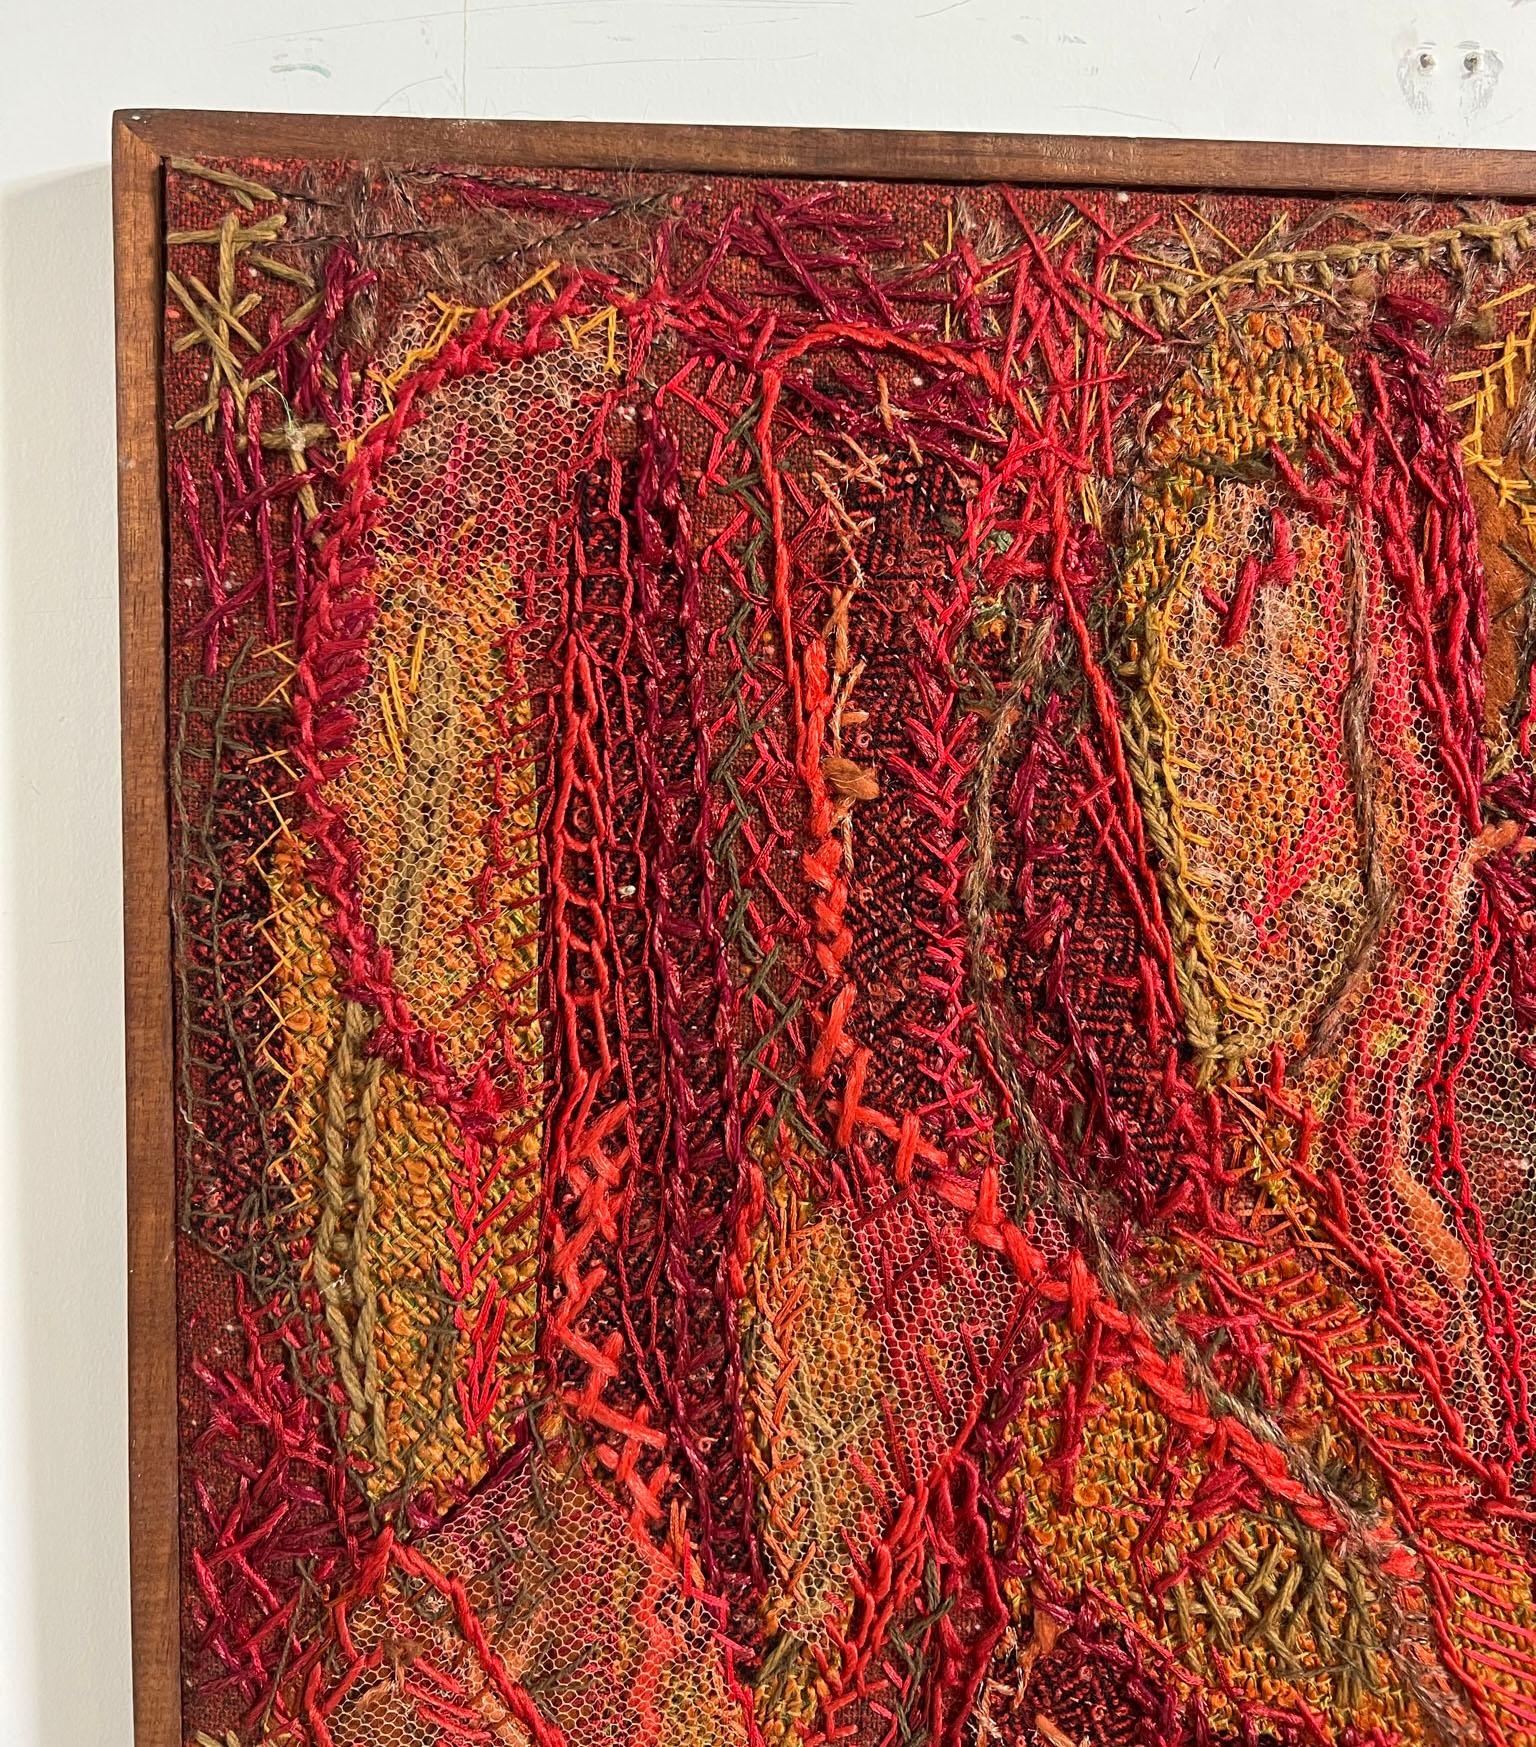 American Abstract 1960s Textile Fiber Art Panel Titled 